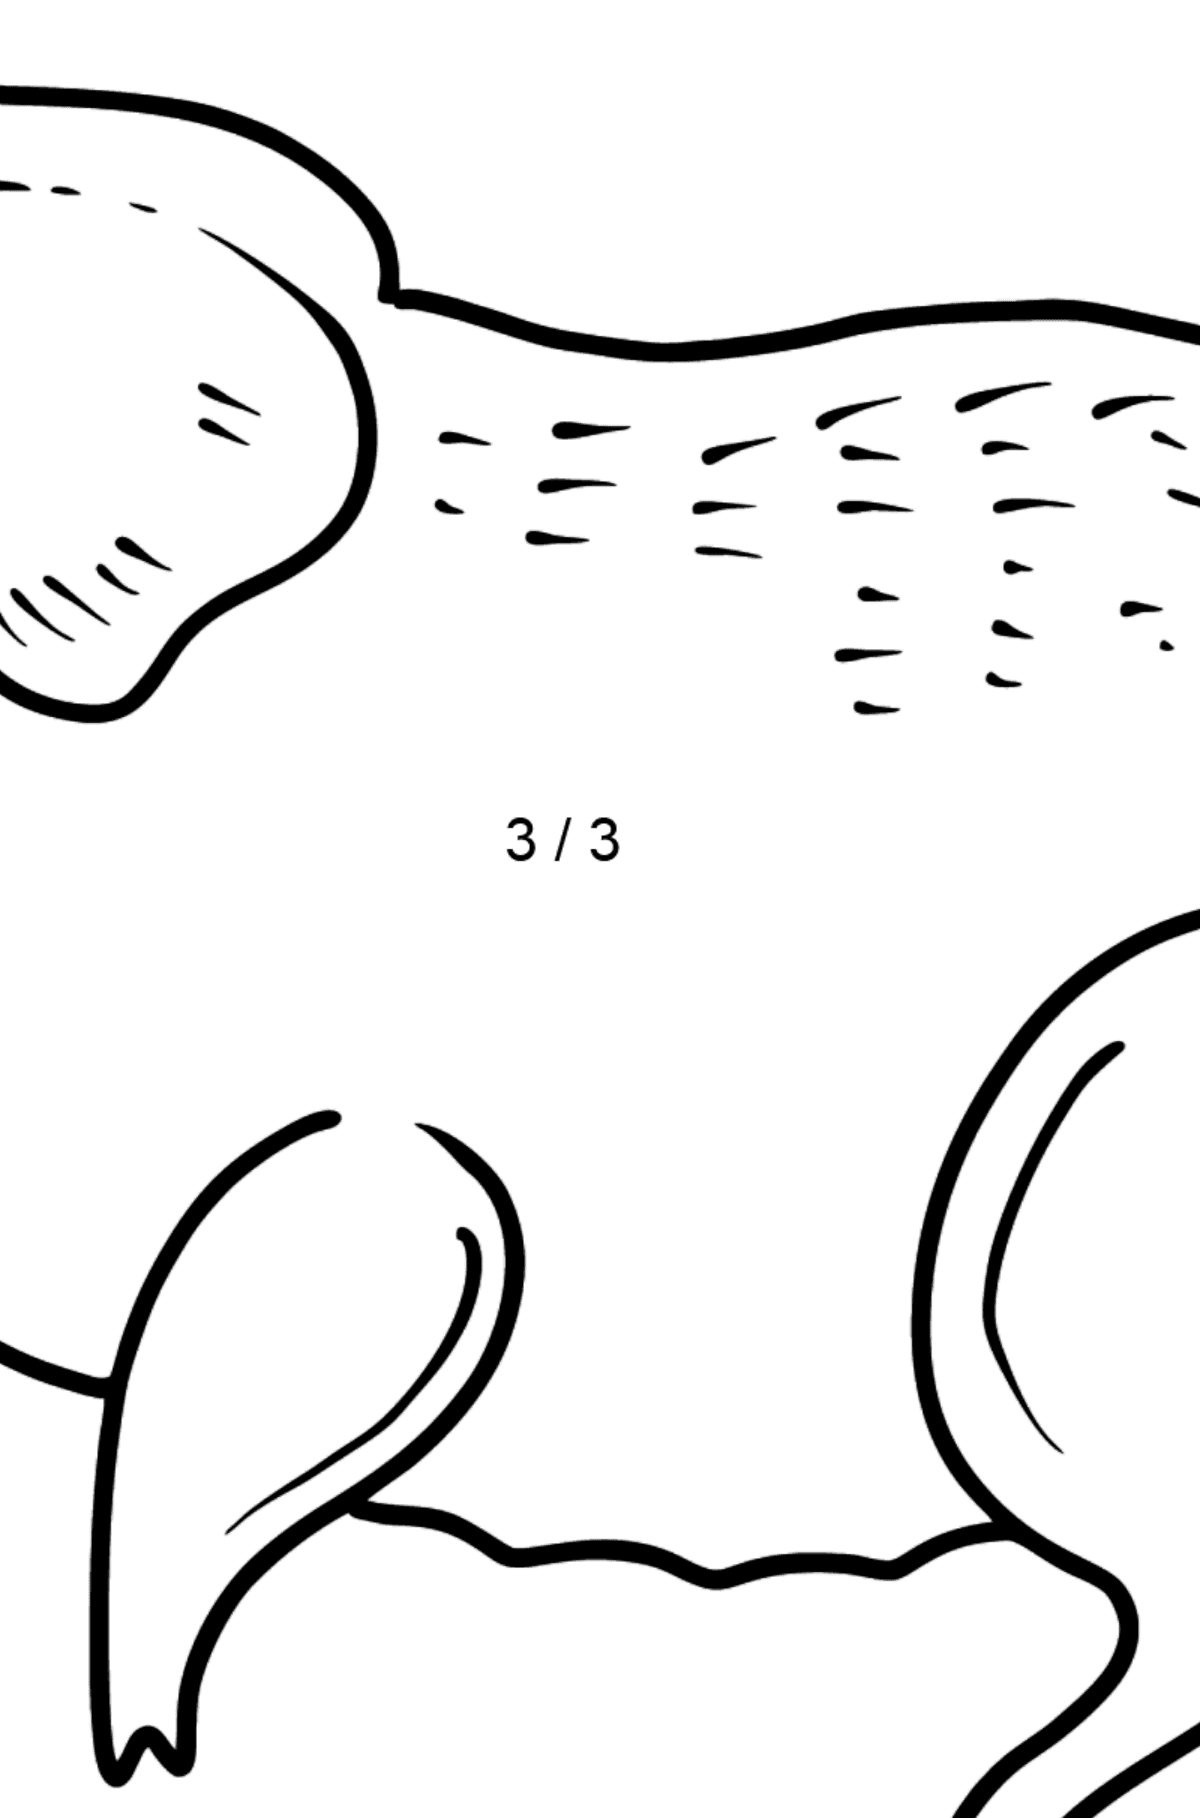 Pig coloring page - Math Coloring - Division for Kids